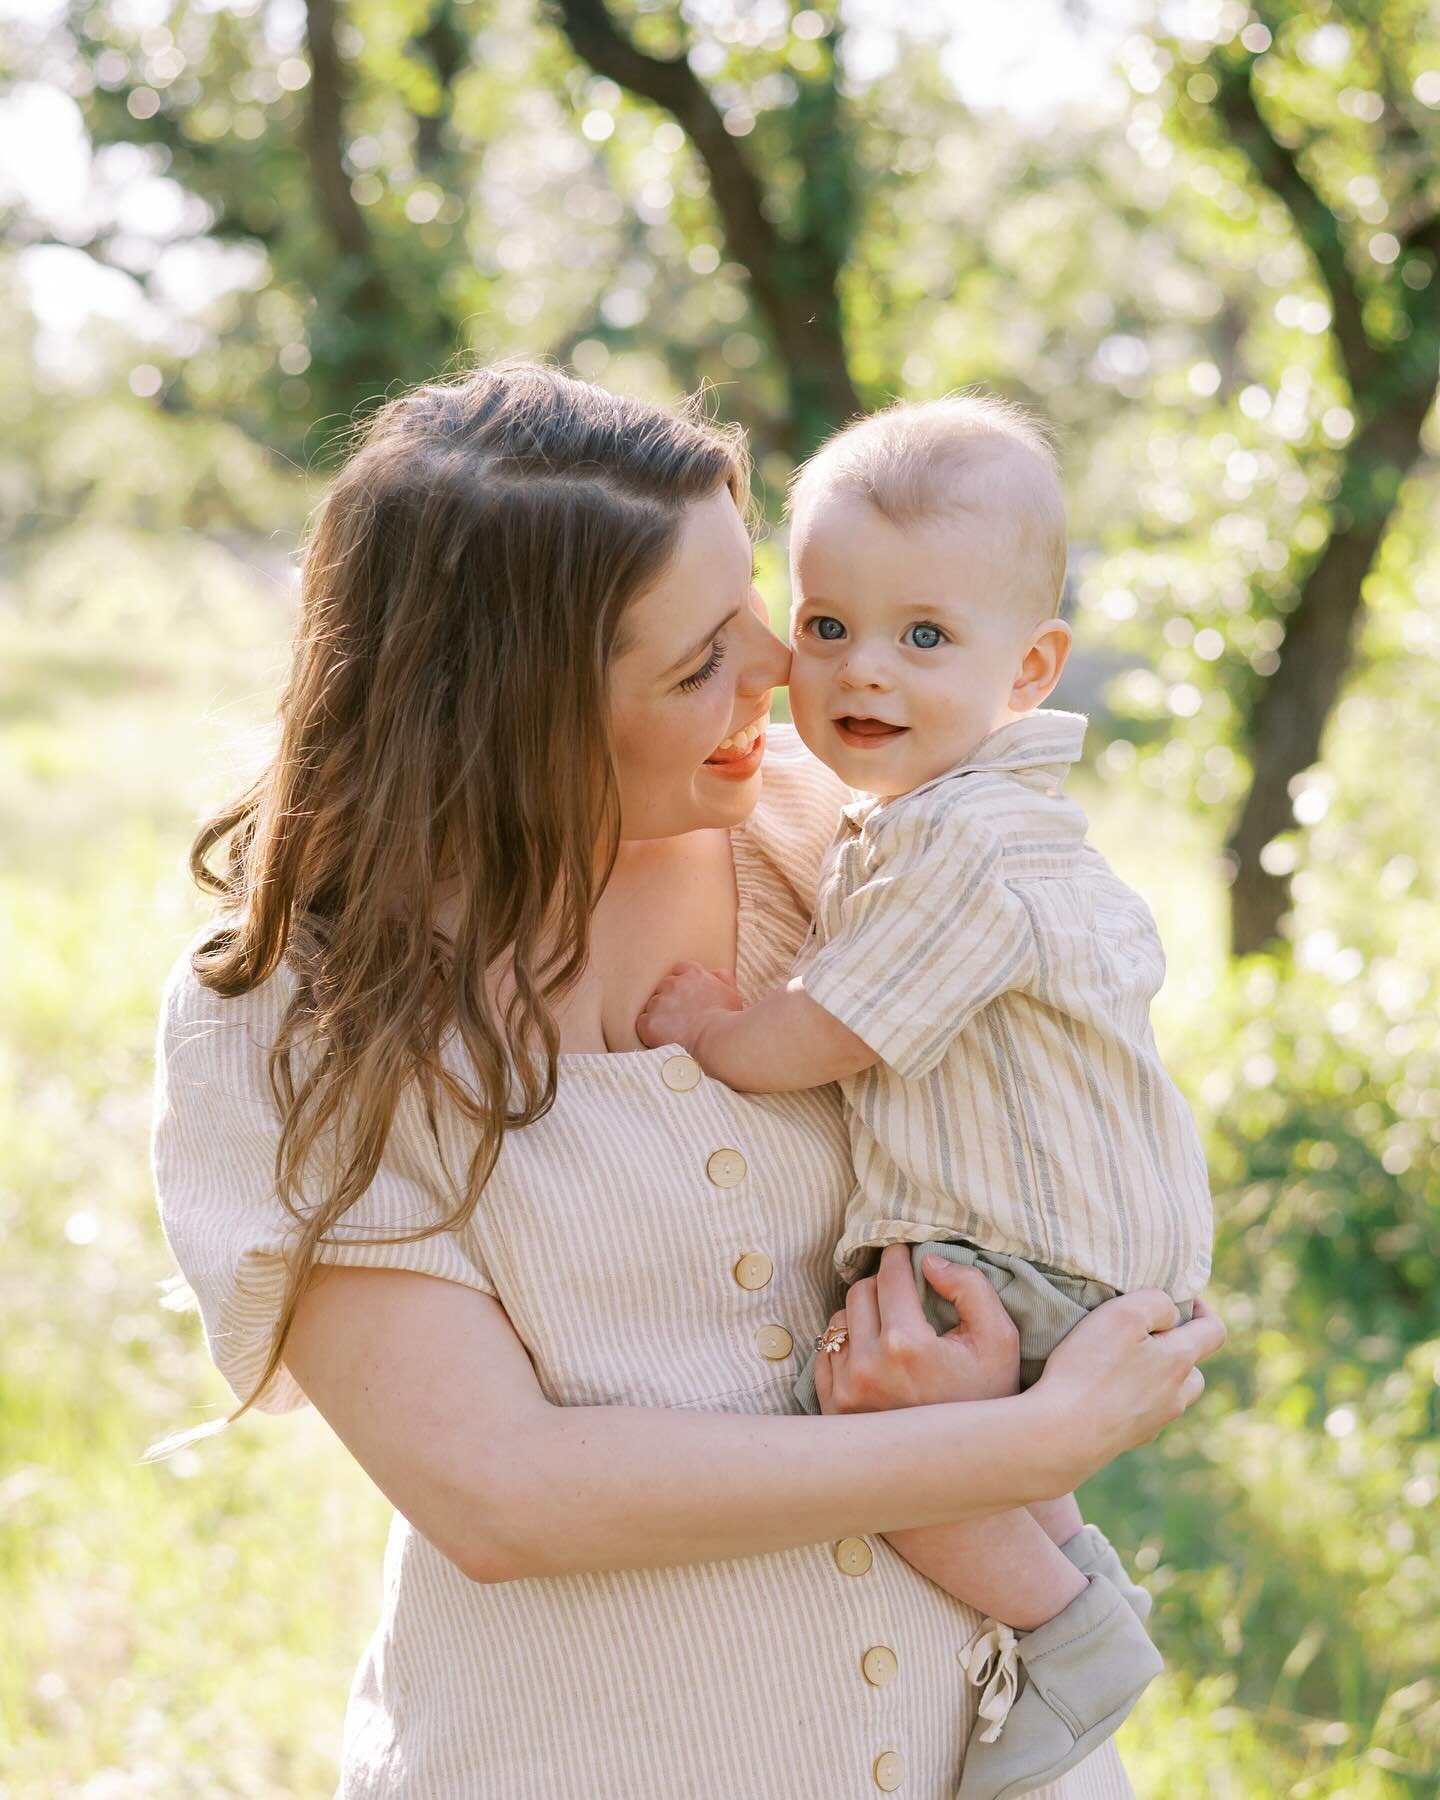 Motherhood Mini Sessions are just around the corner! And there are still time slots available! I would love to capture you and your littles, or your growing bump! Details are below -

Saturday, April 6th at Brushy Creek Lake Park
- $425 for 15 minute